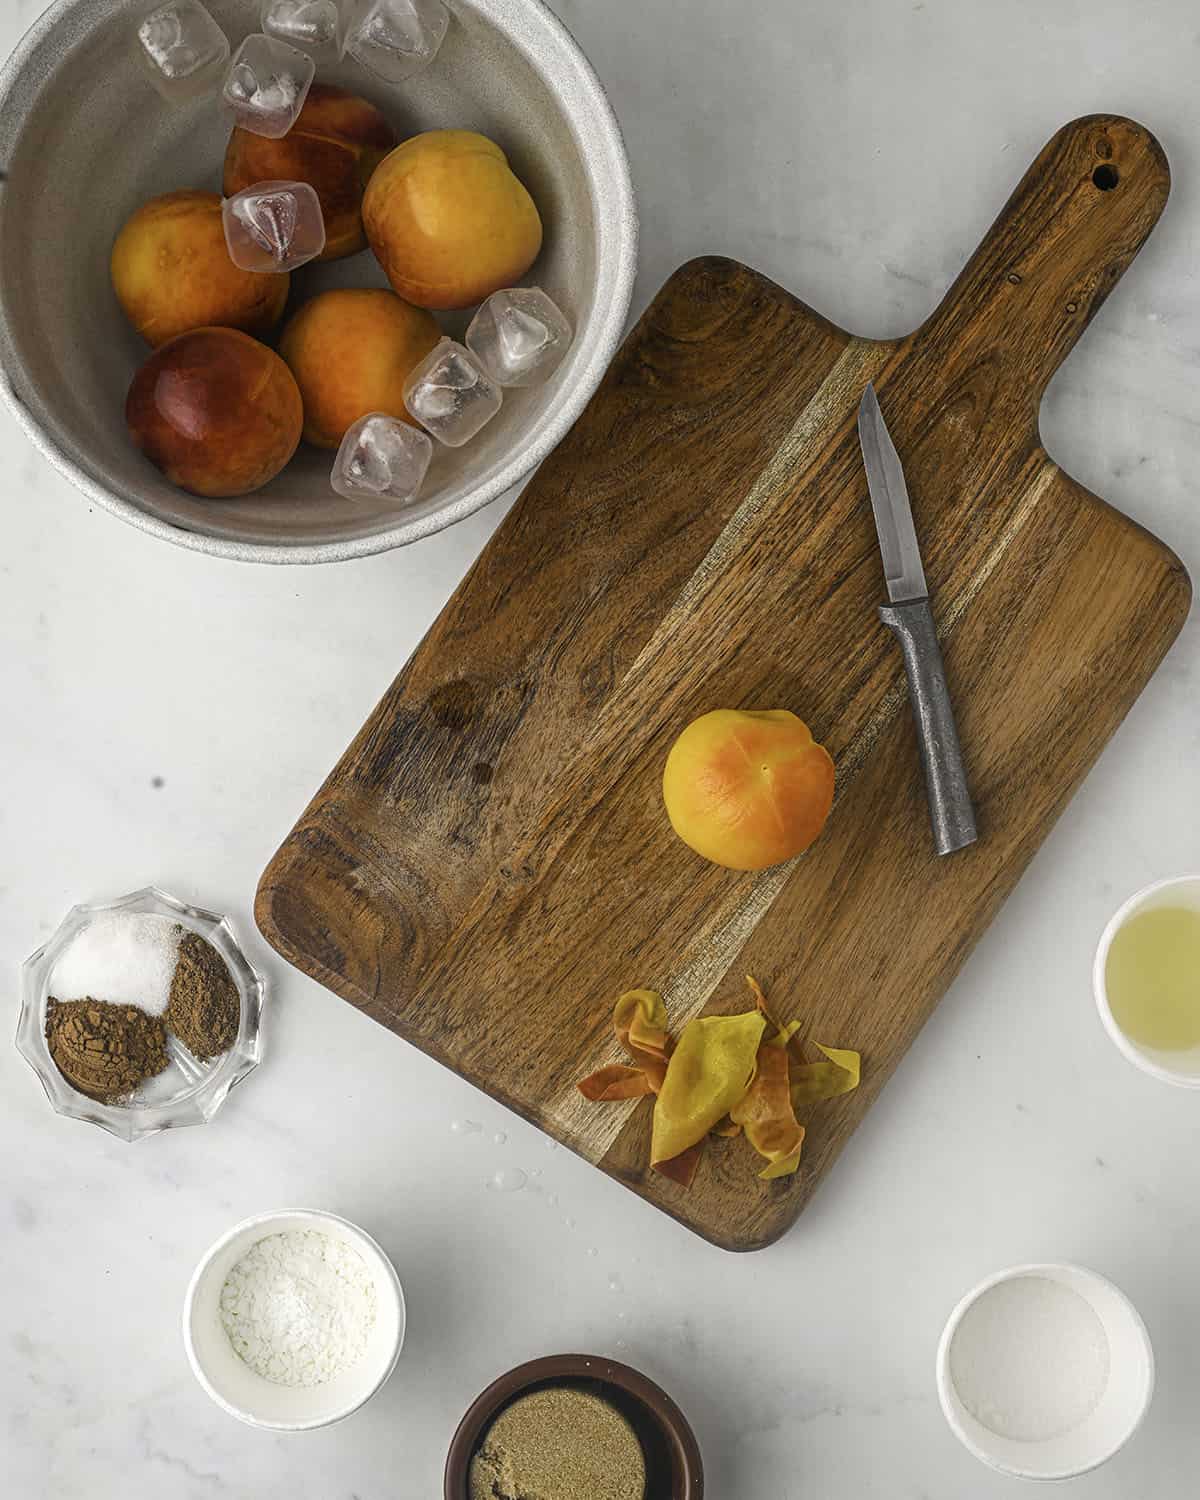 Blanched peaches in a bowl of ice, and one on a wood cutting board that is ready to be sliced, with small bowls of peach filling ingredients surrounding. 